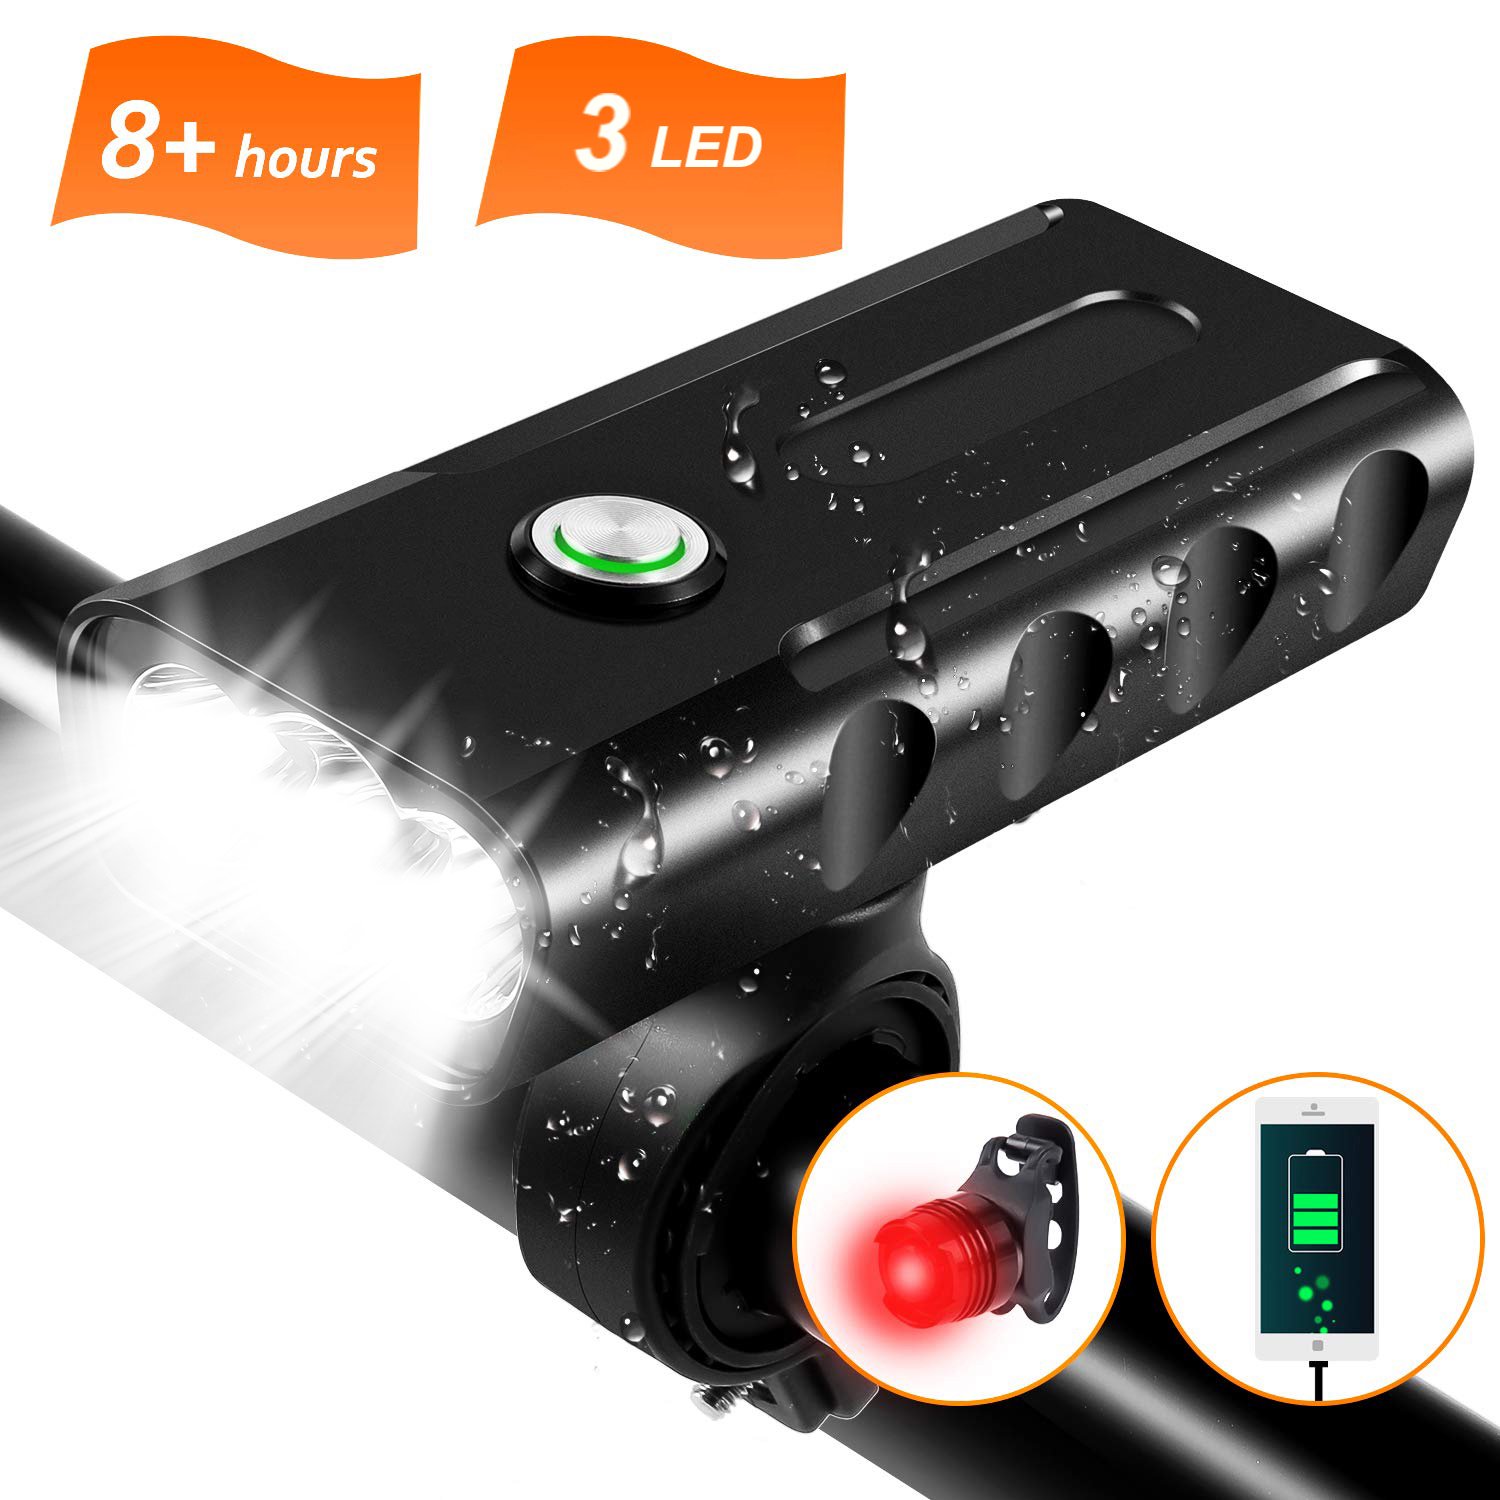 Road SecurityIng Waterproof 1000LM 2 XML-T6 LED Bicycle USB Rechargeable Mountain Bike Headlight with 6 Lighting Modes and Power Display for Mountain City Kid Bicycle